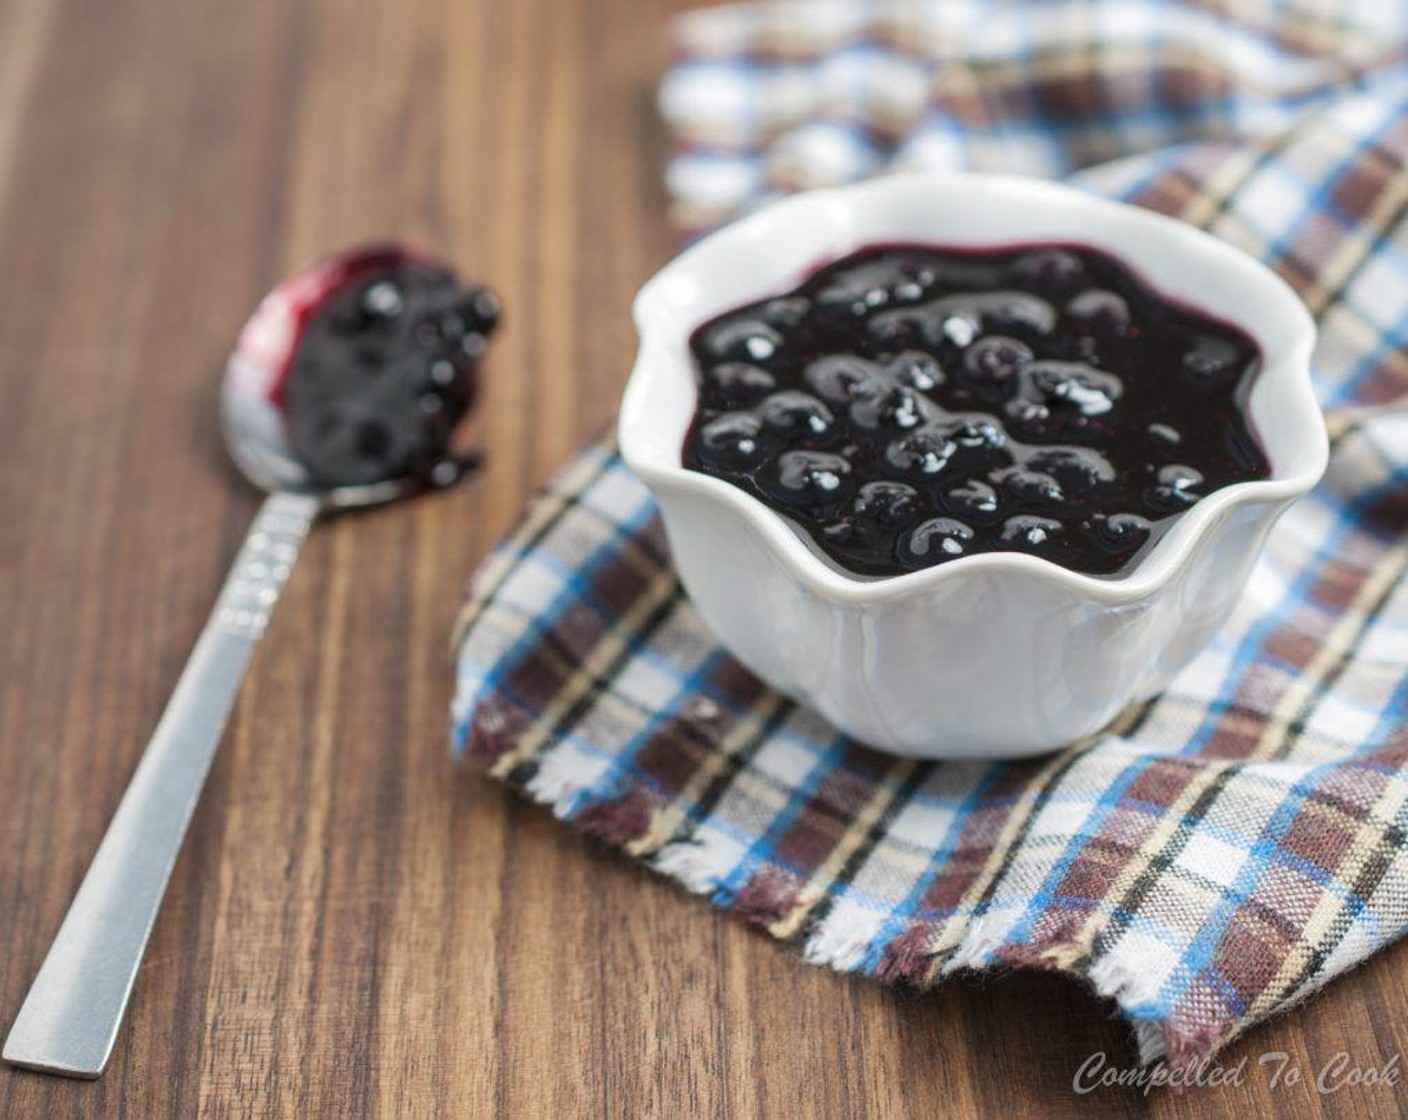 step 5 Remove from heat and stir in Pure Vanilla Extract (1 tsp) and Blueberry Balsamic Vinegar (2 Tbsp). Serve warm with french toast or pancakes.